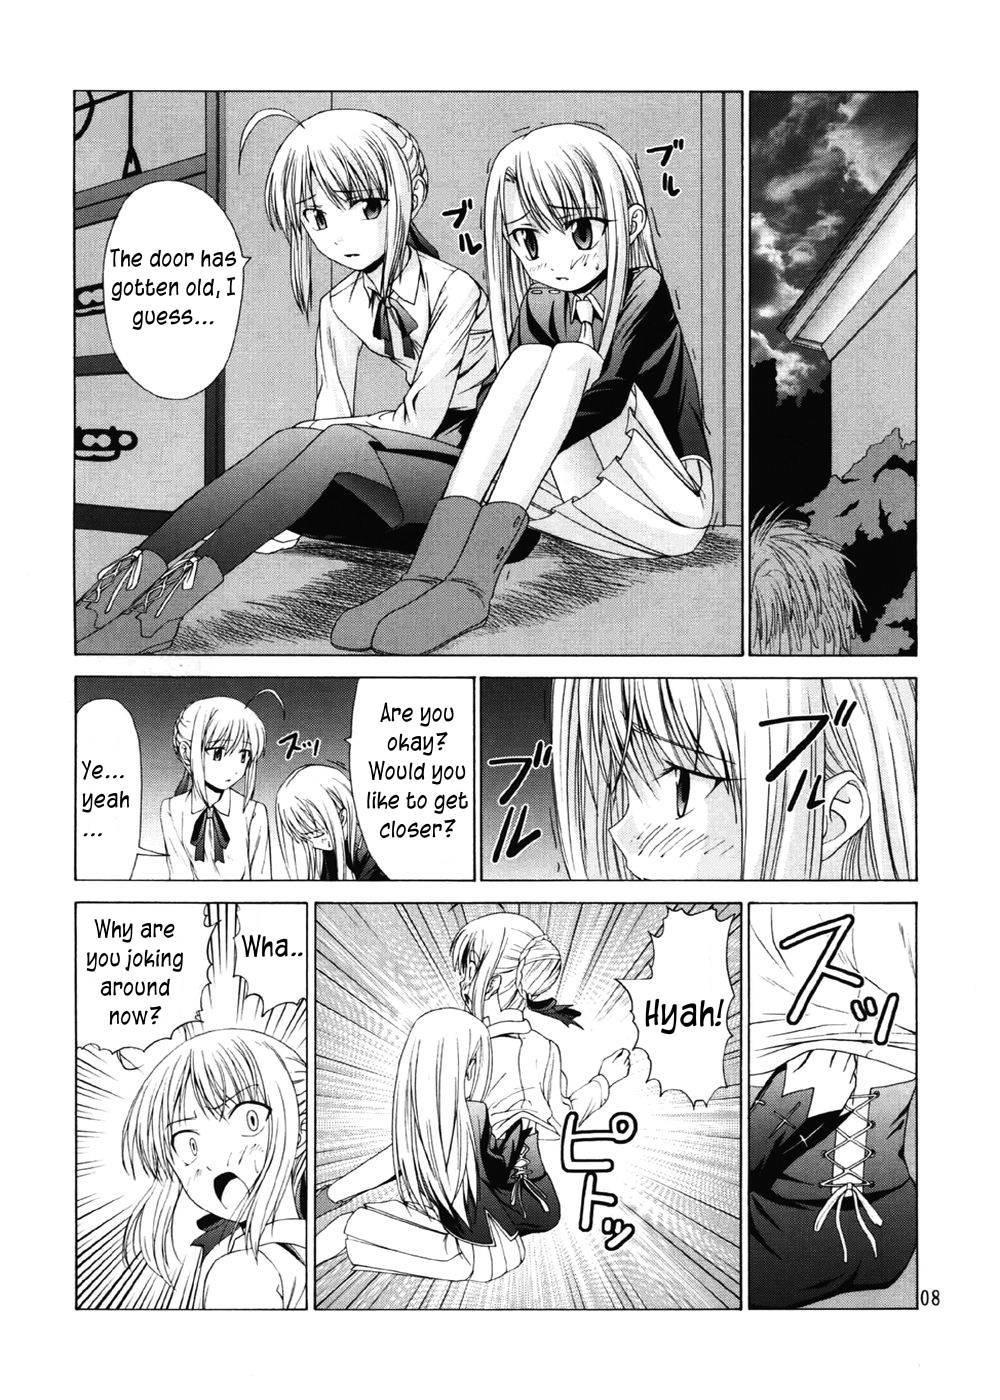 Family Sex PLATONIC MAGICIAN H - Fate stay night Asian - Page 7